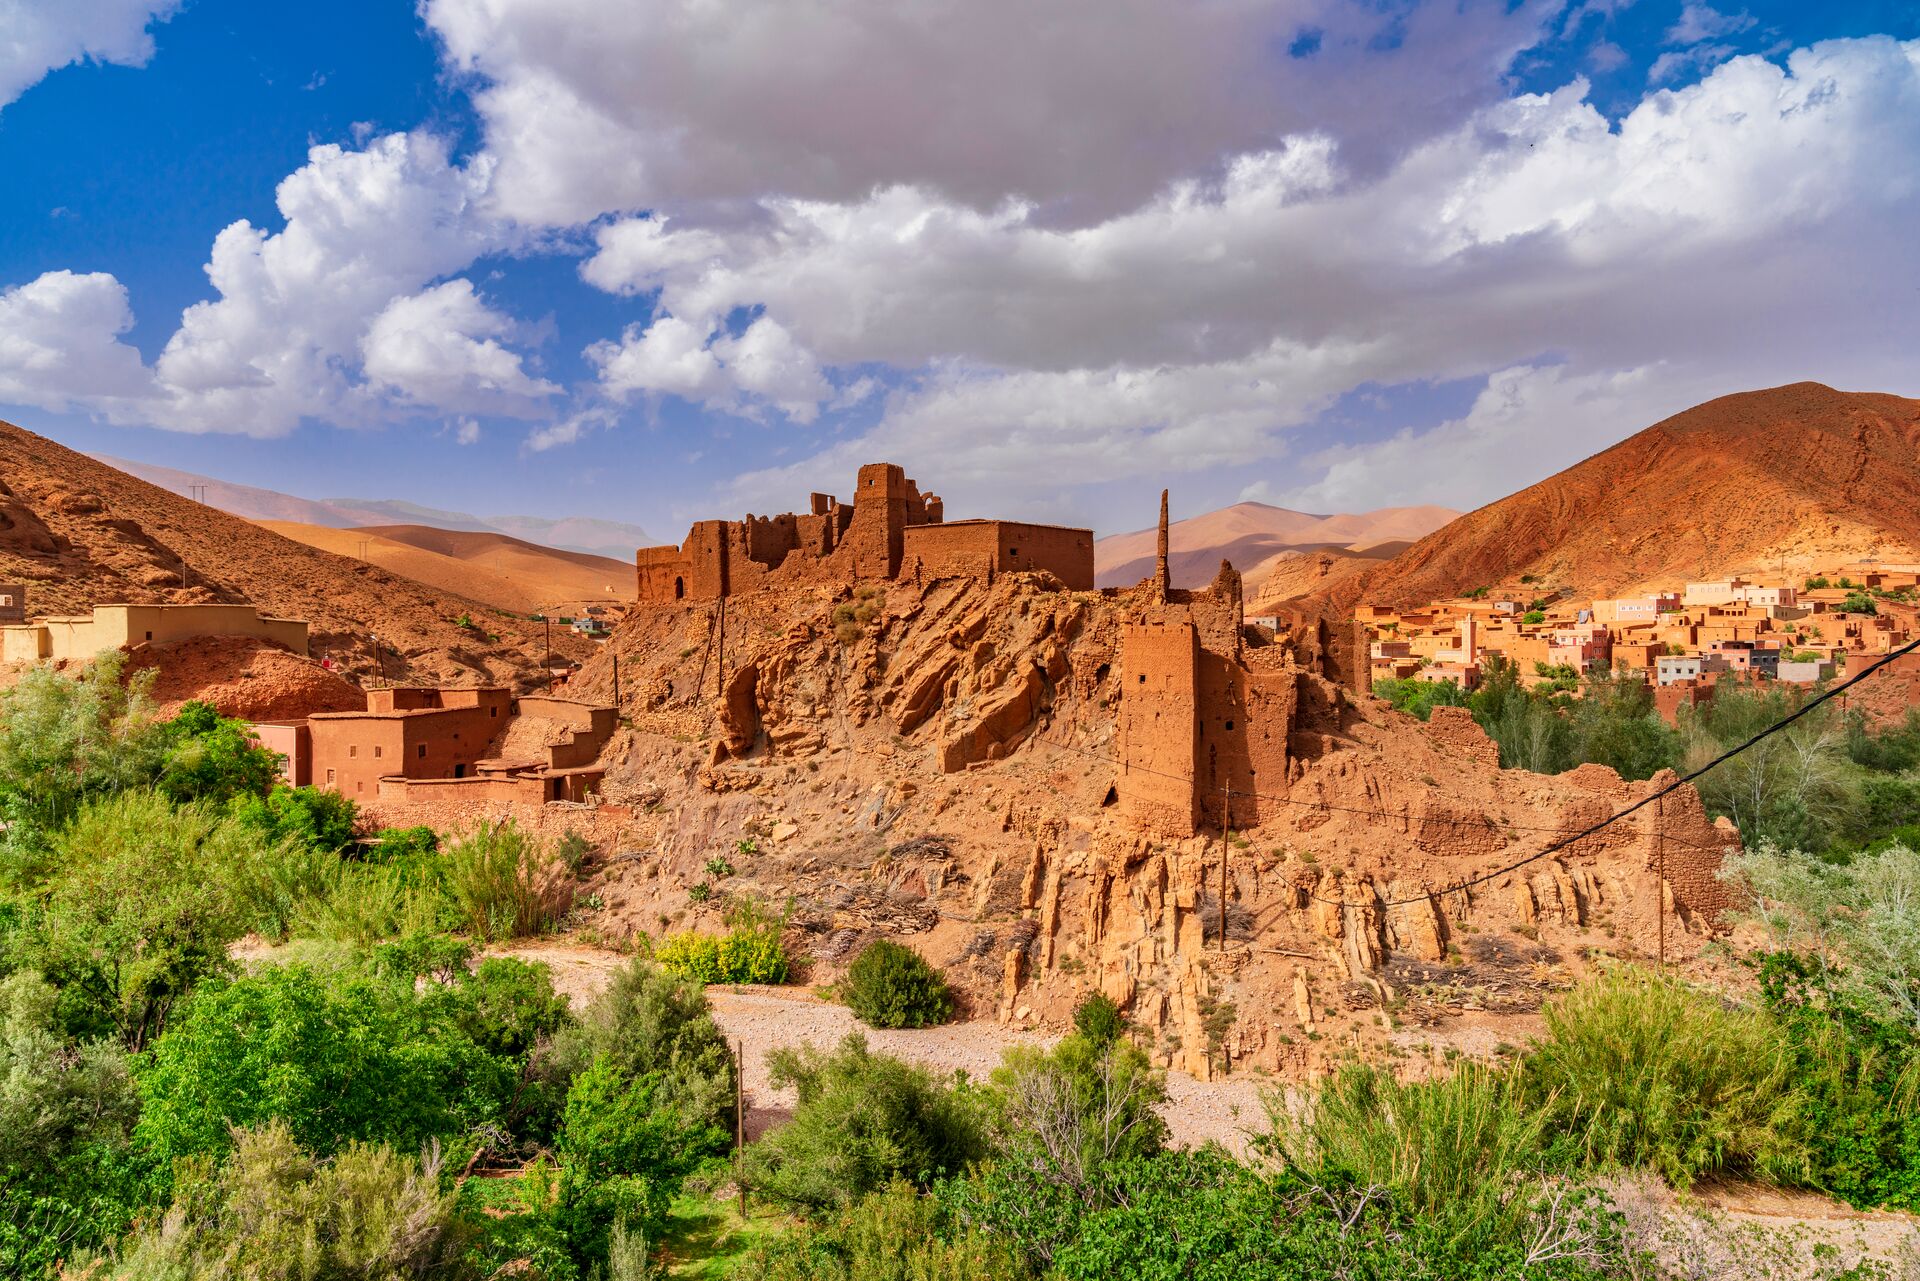 Res stone houses, mountains and green vegetation of Daded valley in Morocco, with lots of white clouds overhead